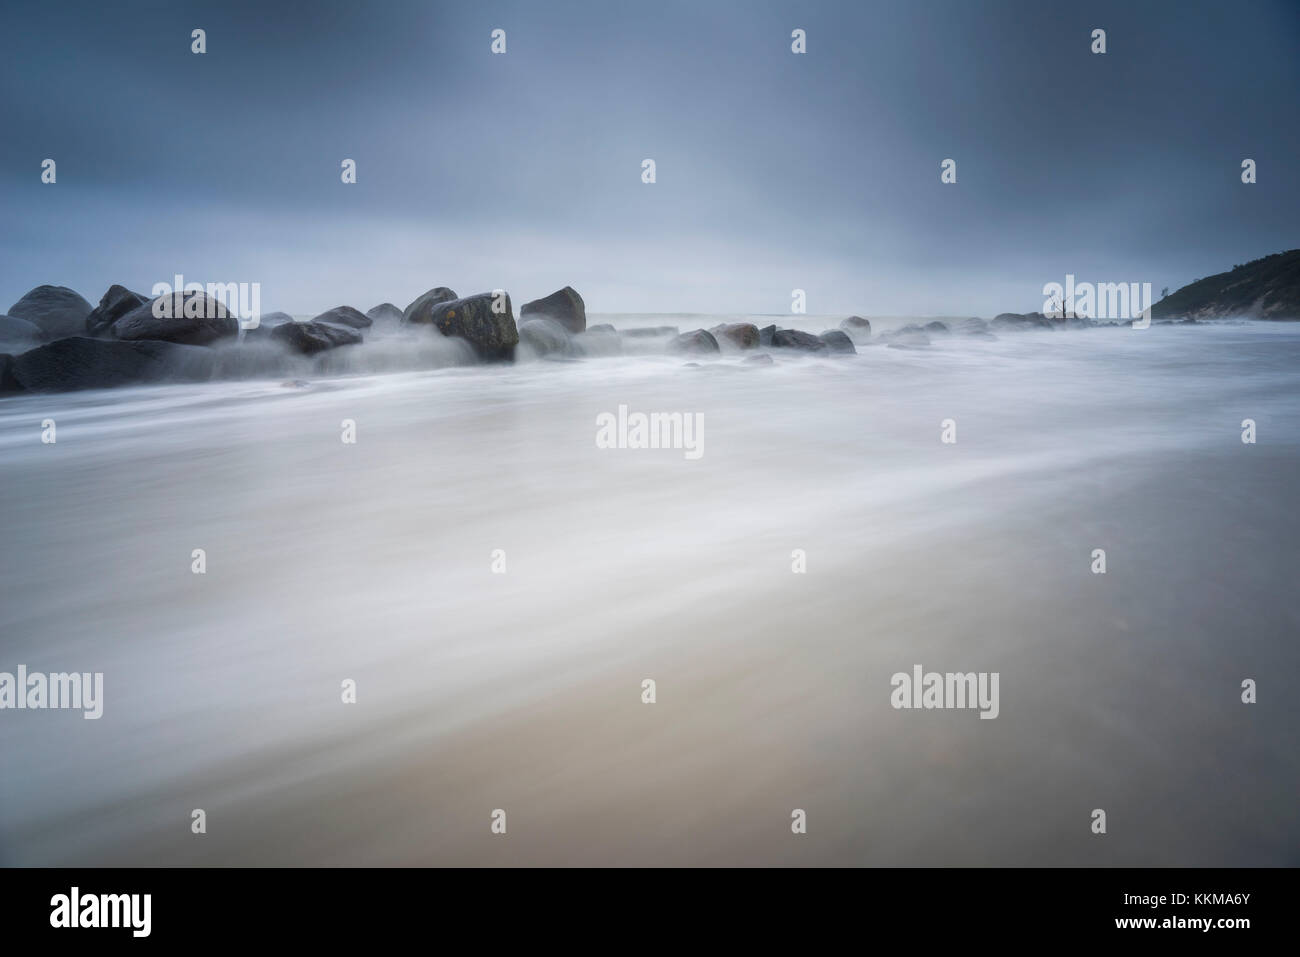 The Baltic Sea, stormy moving sea, shore, beach, stones in the water Stock Photo